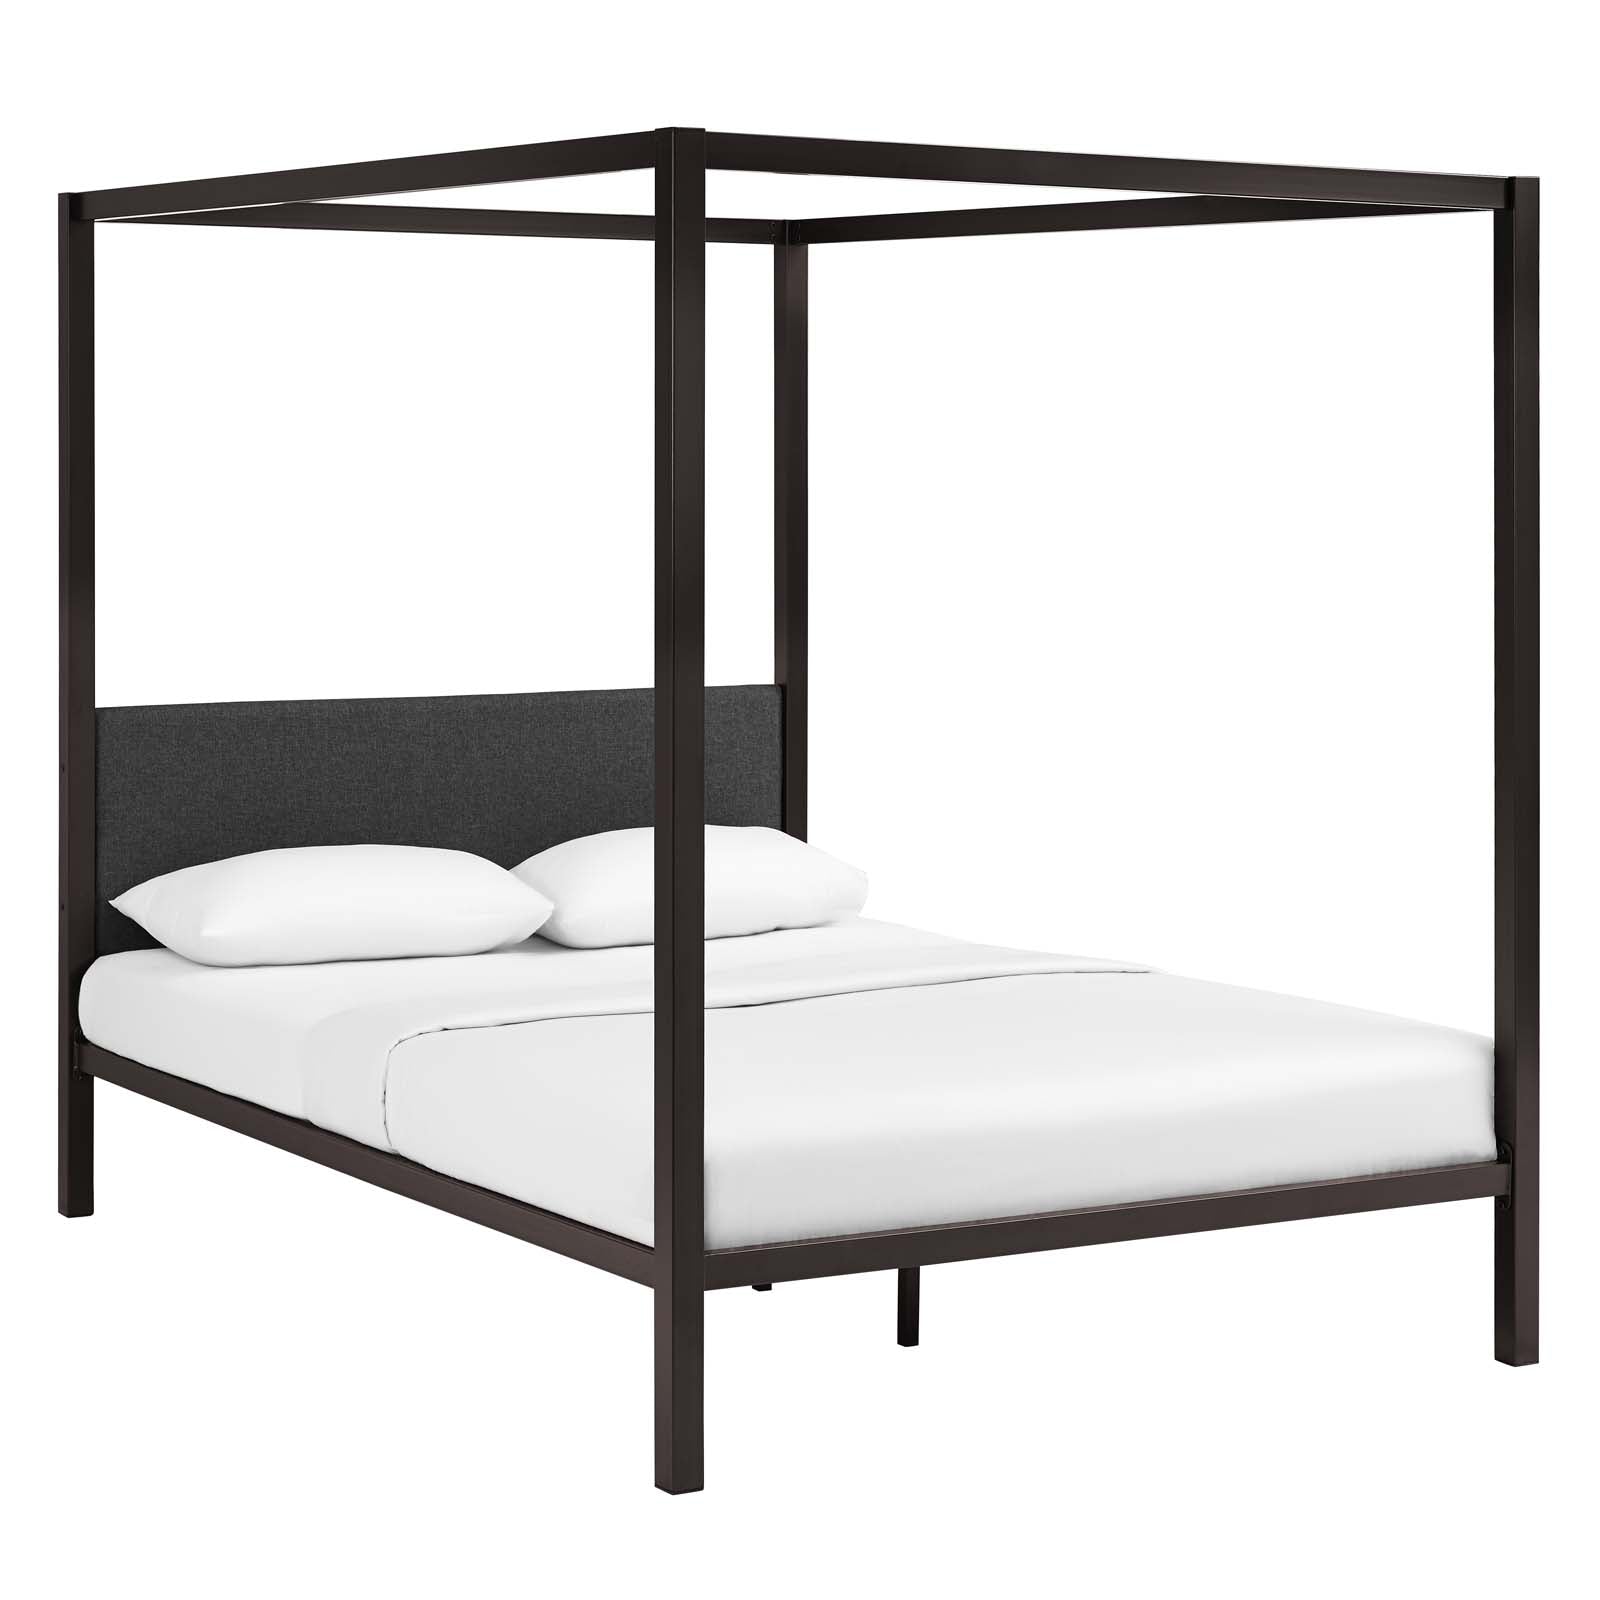 Modway Beds - Raina Queen Canopy Bed Frame Brown Gray